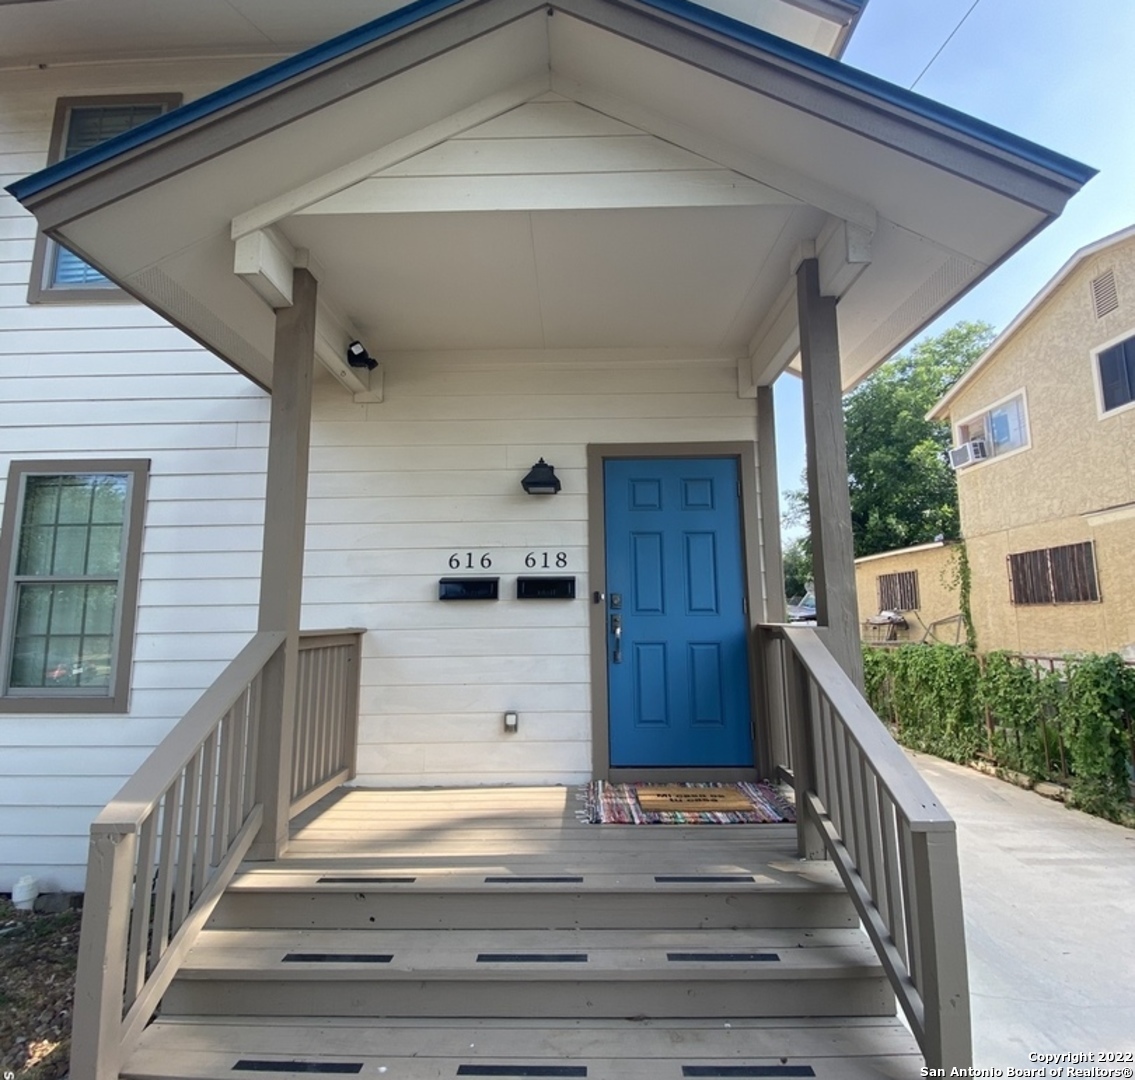 This is truly one of a kind! Investors the possibilities with this extremely rare opportunity are endless! Looking for a home that would be perfect for an AirBnb? This is it! This 3 bedroom, 3 bathroom, split level home is 2,974 sq ft. Each unit is identical with 1,487 sq ft. Each offers two master suites with their own entrance/patio and the 3rd bedroom has a bathroom right outside of the room. All three bedrooms offer huge walk-in closets and with plenty of space. There is no carpet throughout the home. Appliance in both units do convey. The 1st floor is furnished and that can be sold separately and will not convey. here is a park across the street and walking distance to HEB. Minutes from downtown with easy access to major highways. Rent out each room if you desire or live in one unit and rent out the other. You have a lot of options with this beautiful property. If you are looking for passive income this is a must see!